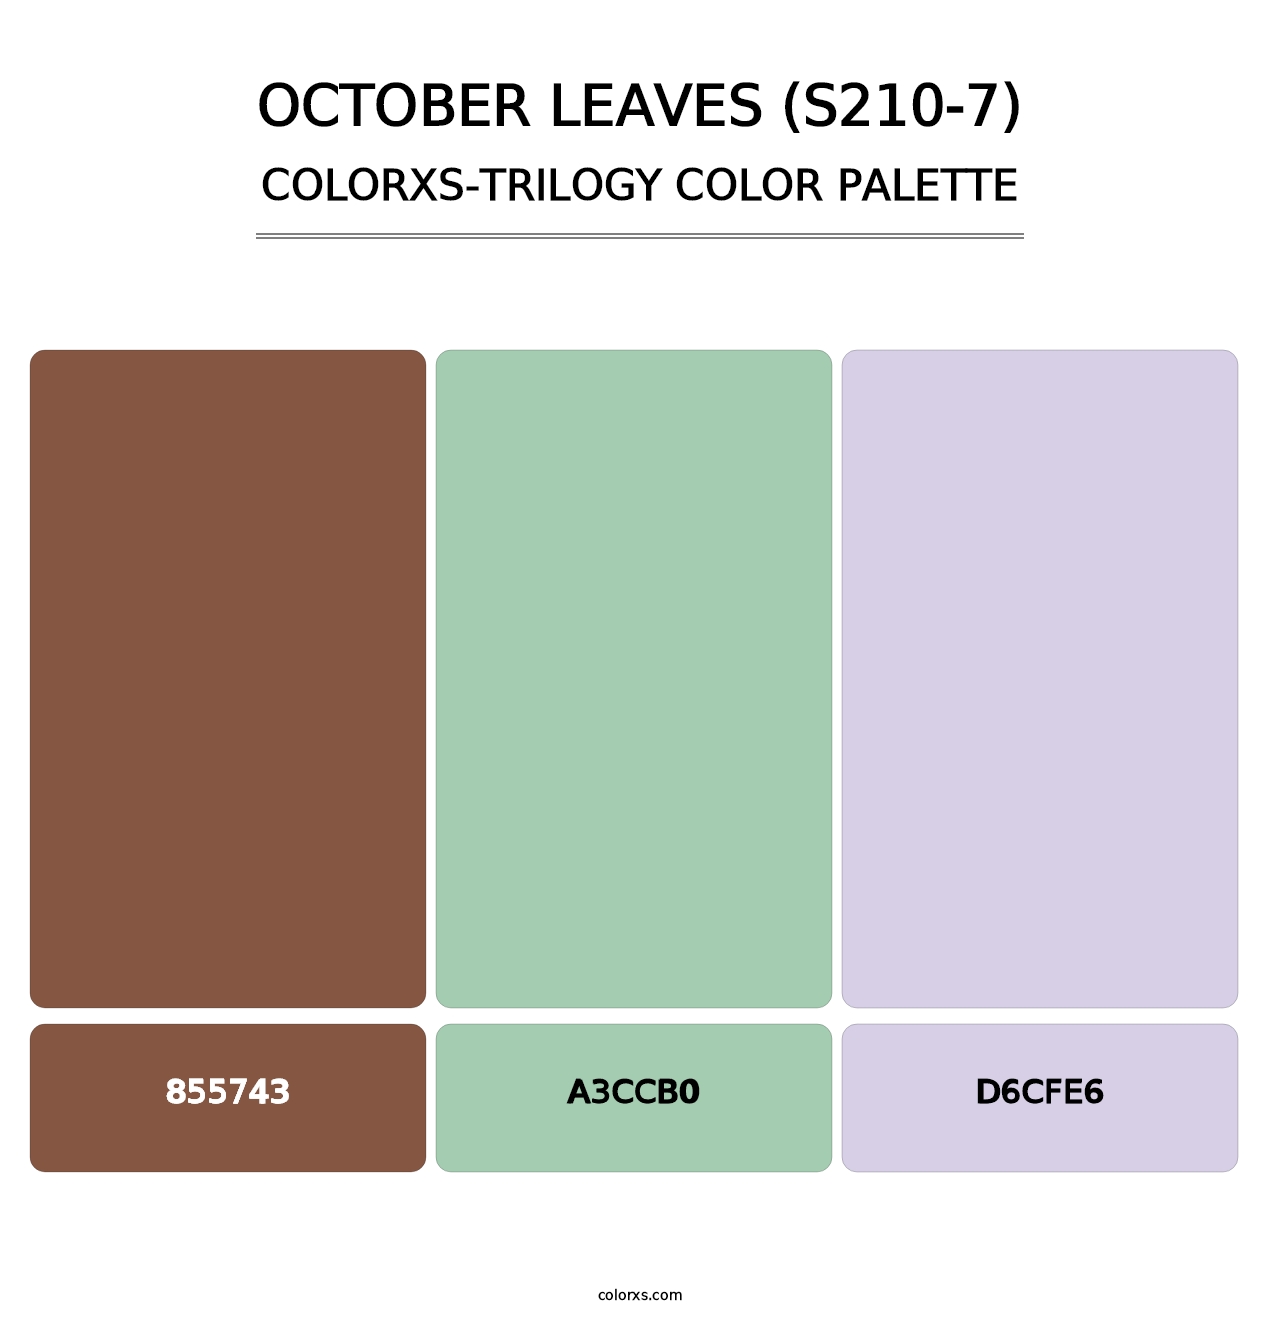 October Leaves (S210-7) - Colorxs Trilogy Palette